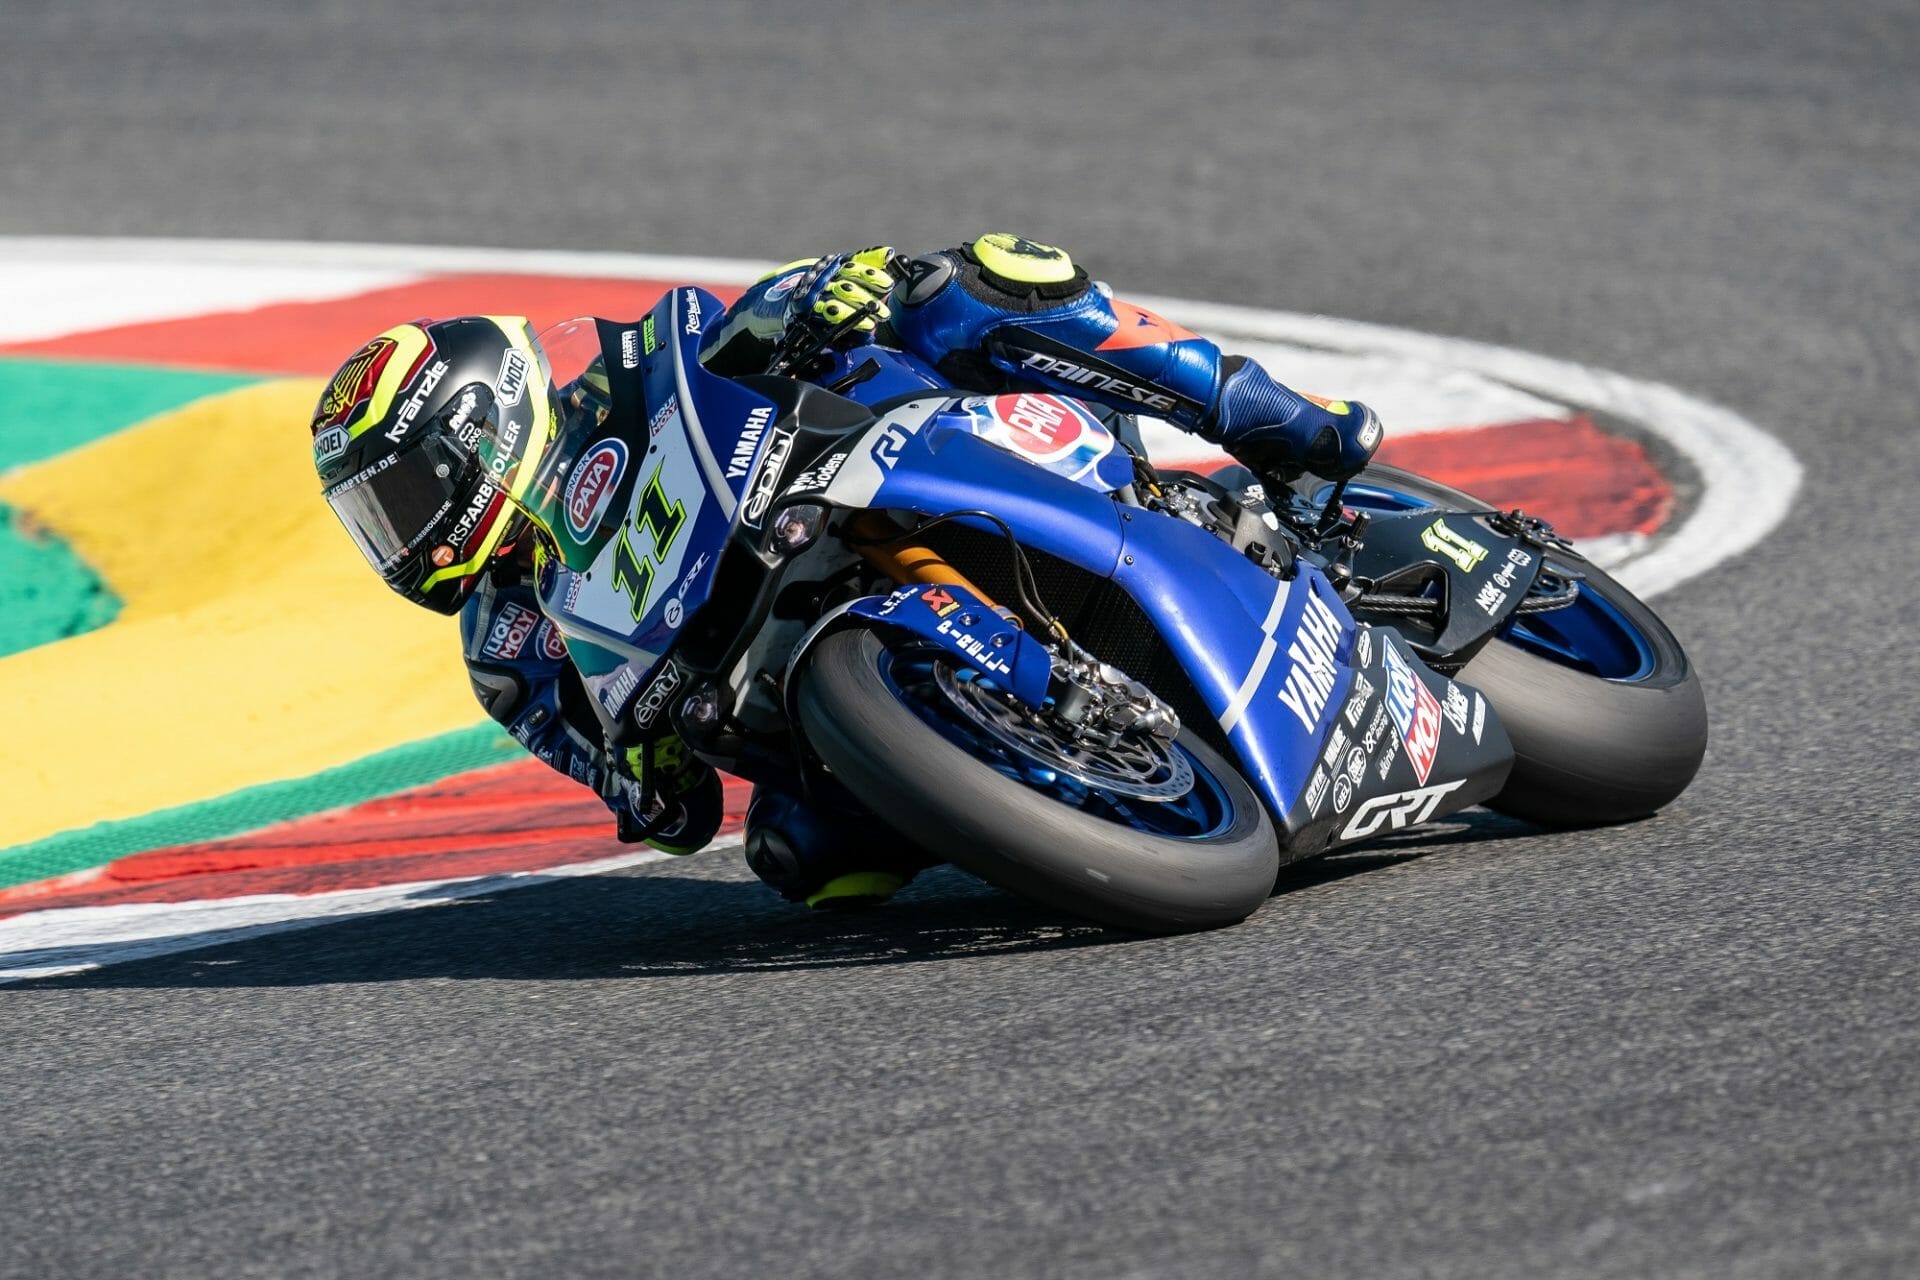 Caricasulo joins the WSBK, Cortese loses his place